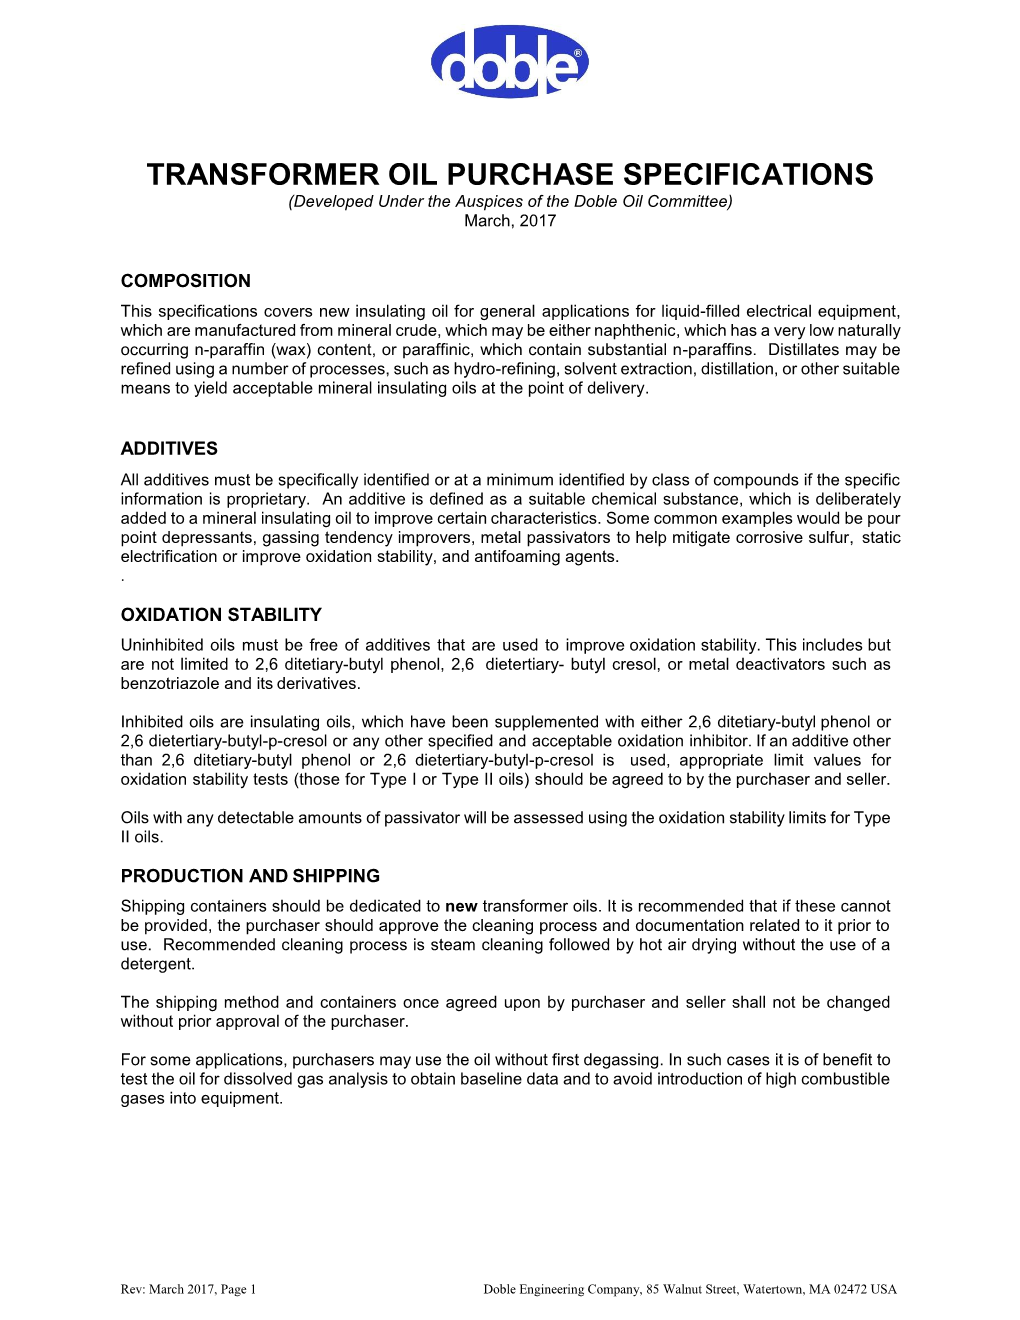 TRANSFORMER OIL PURCHASE SPECIFICATIONS (Developed Under the Auspices of the Doble Oil Committee) March, 2017